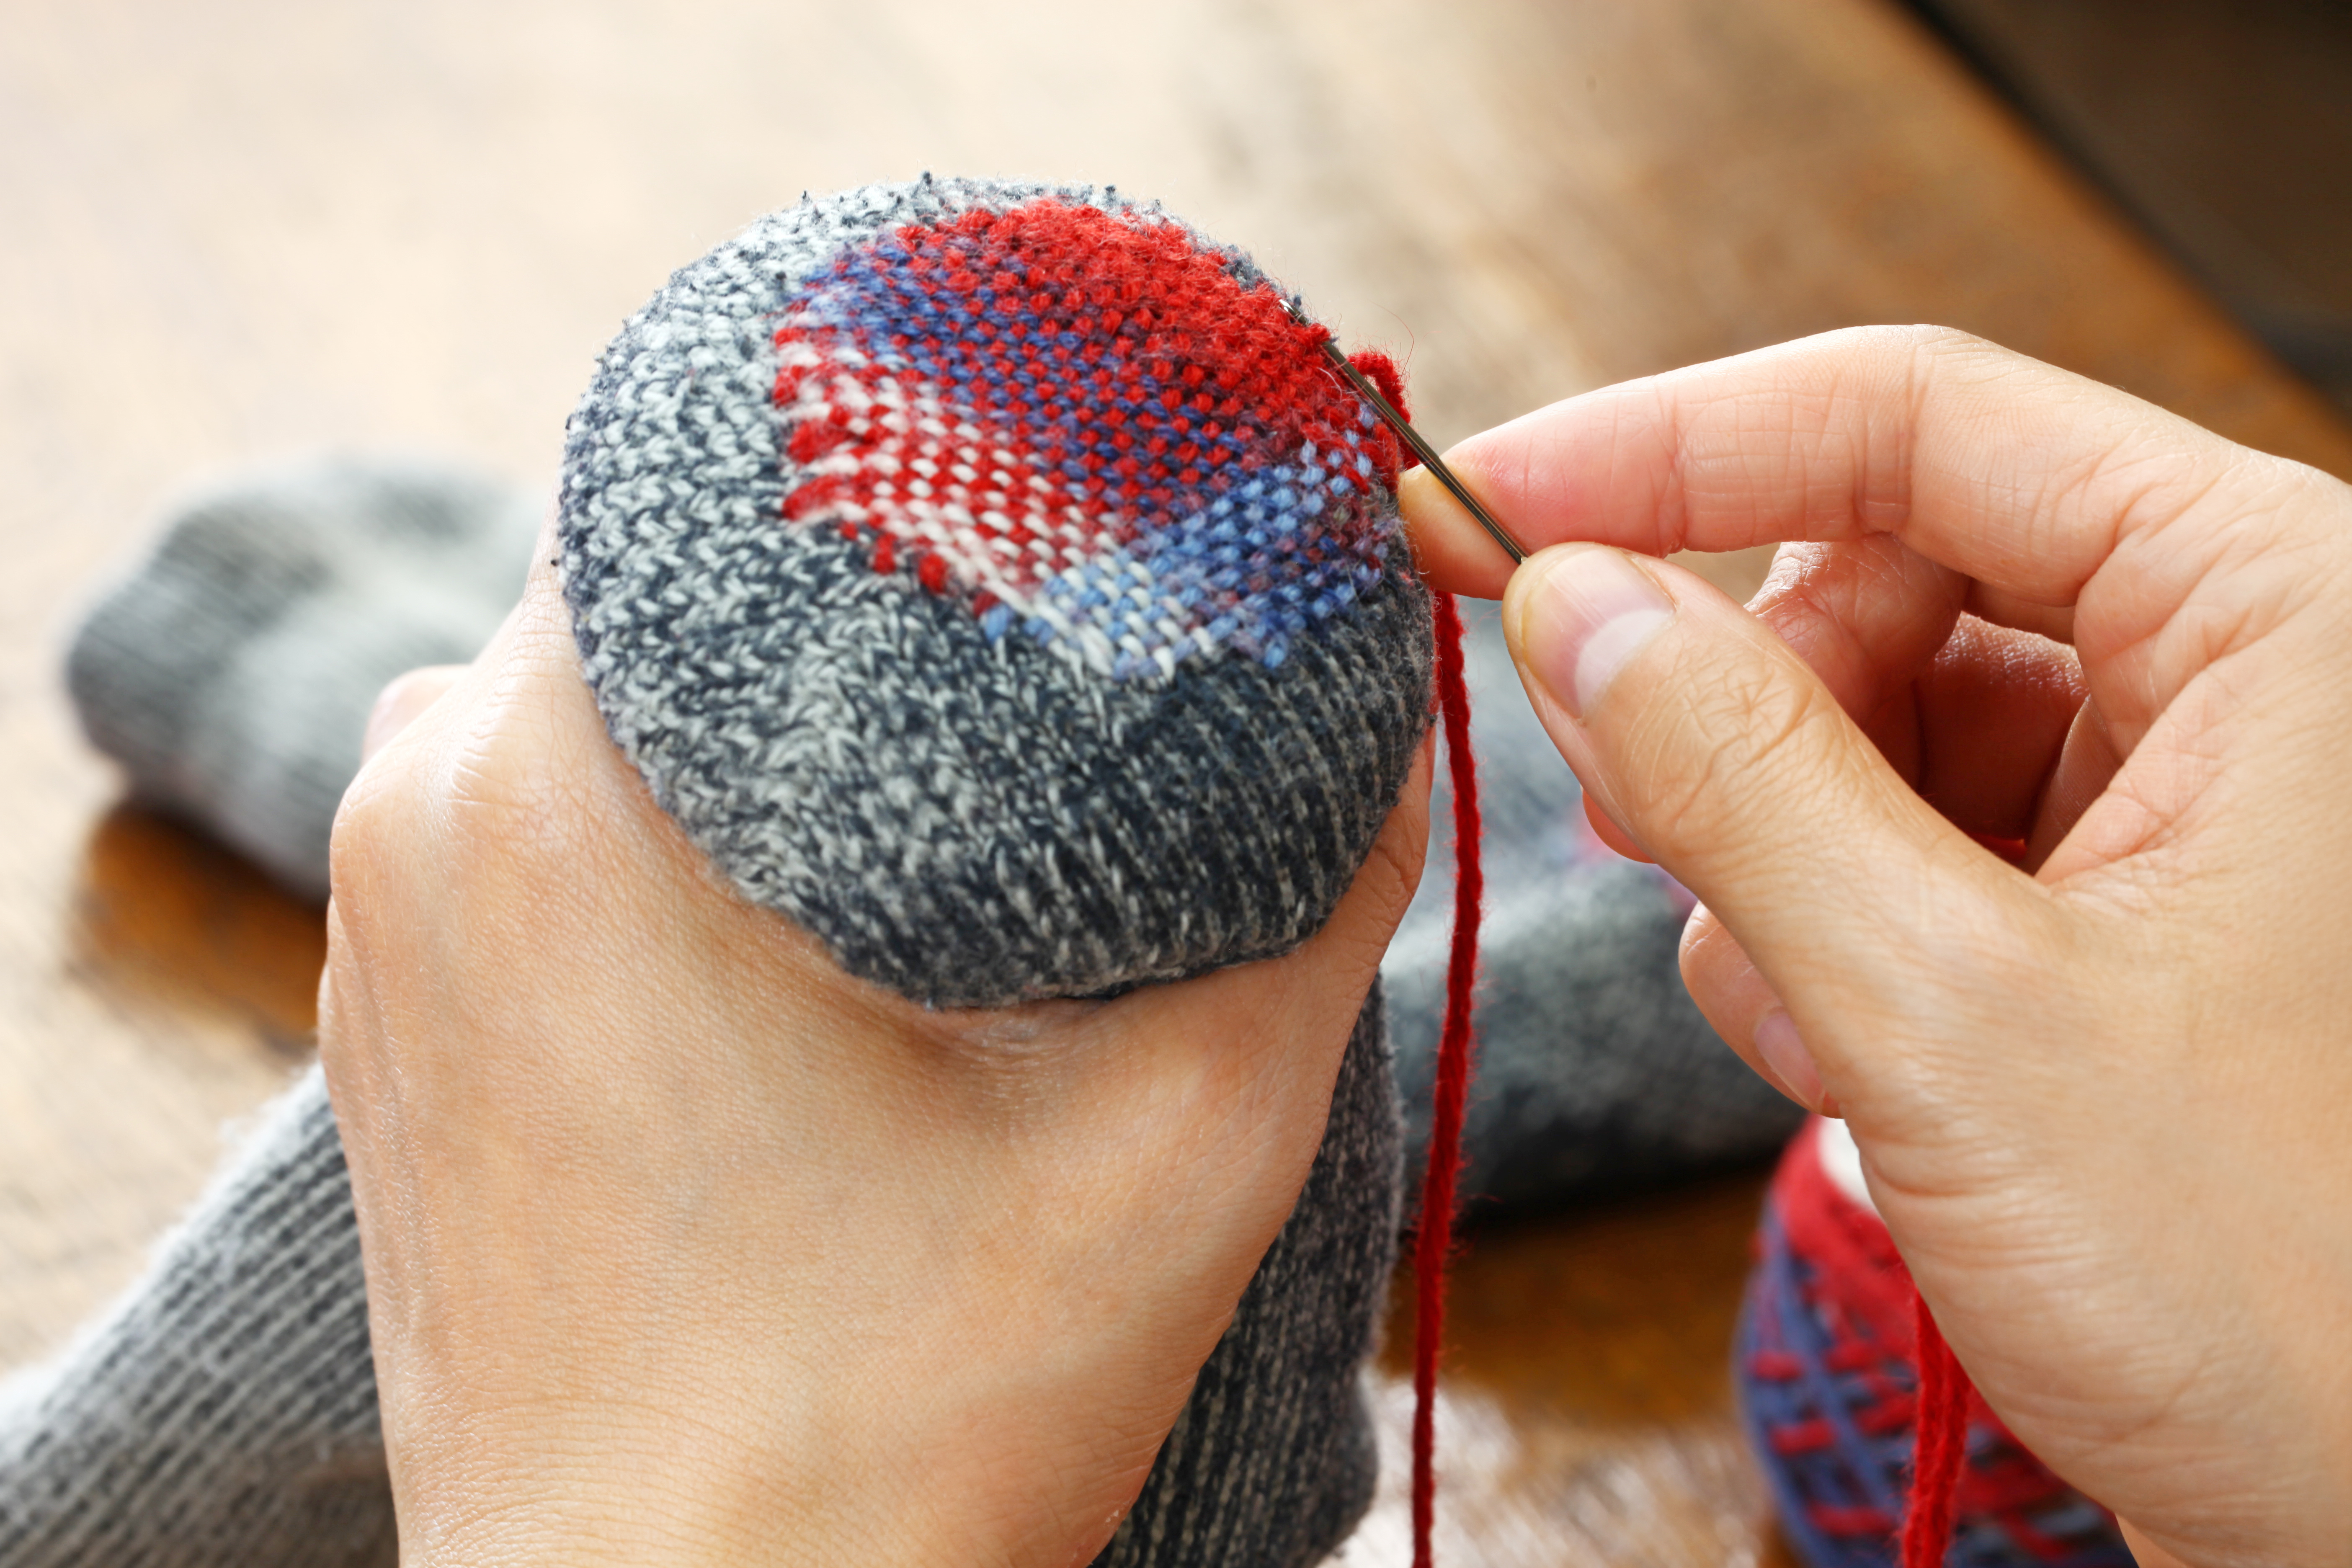 A pair of hands mending a sock through colorful darning.